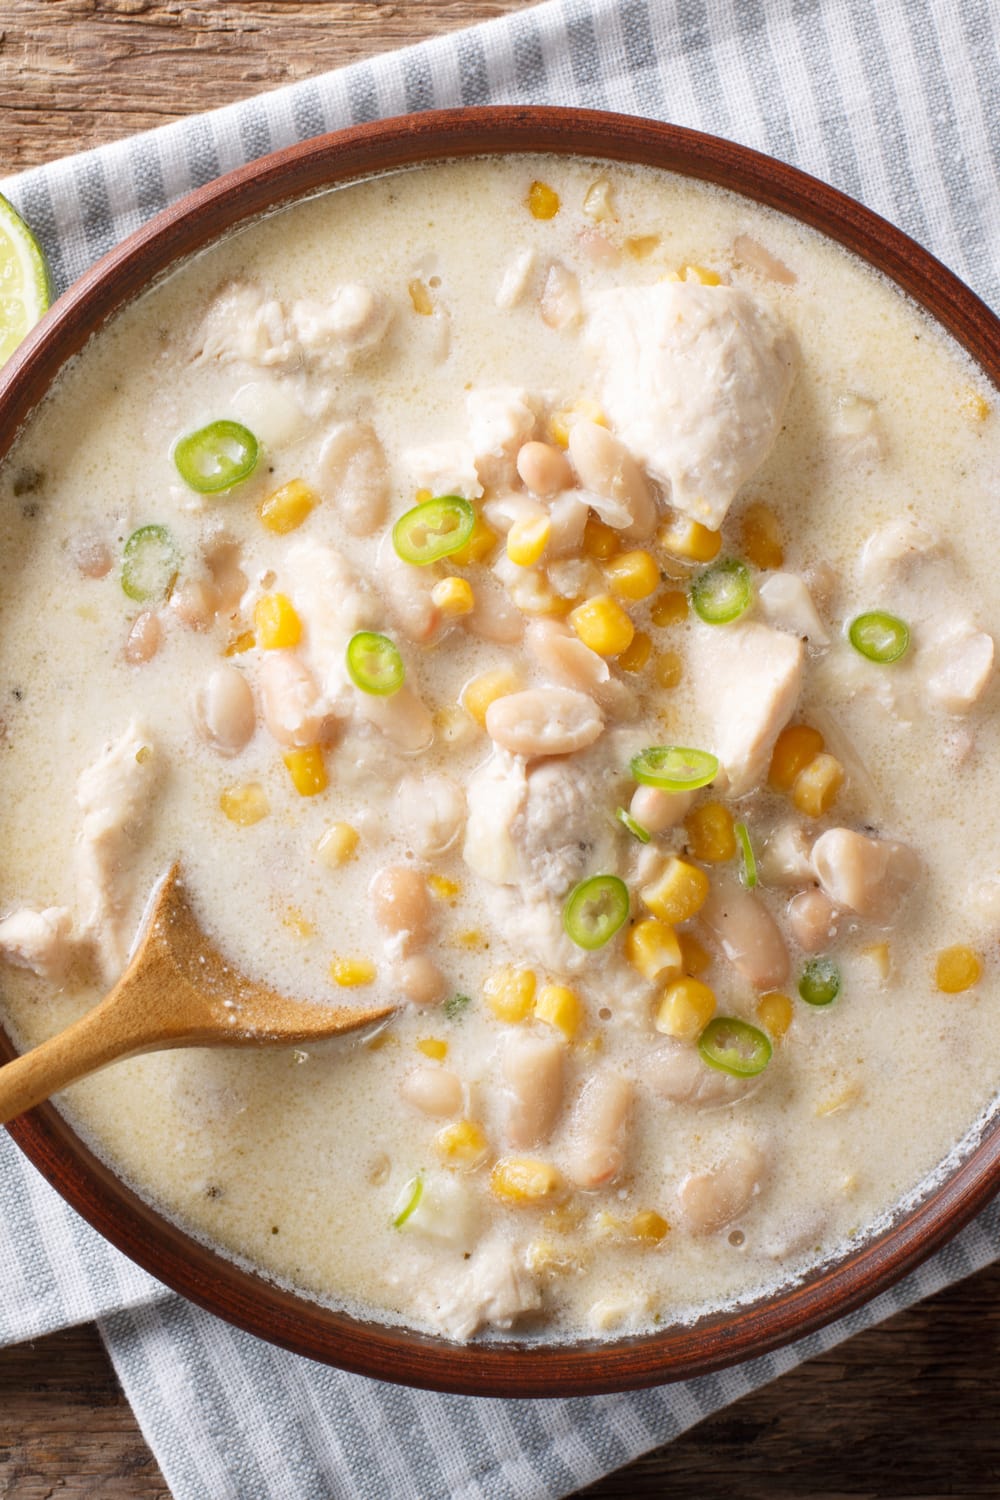 Bowl of White Chicken Chili Made With White Soup, Chicken Meat, Corn and Green Chilis